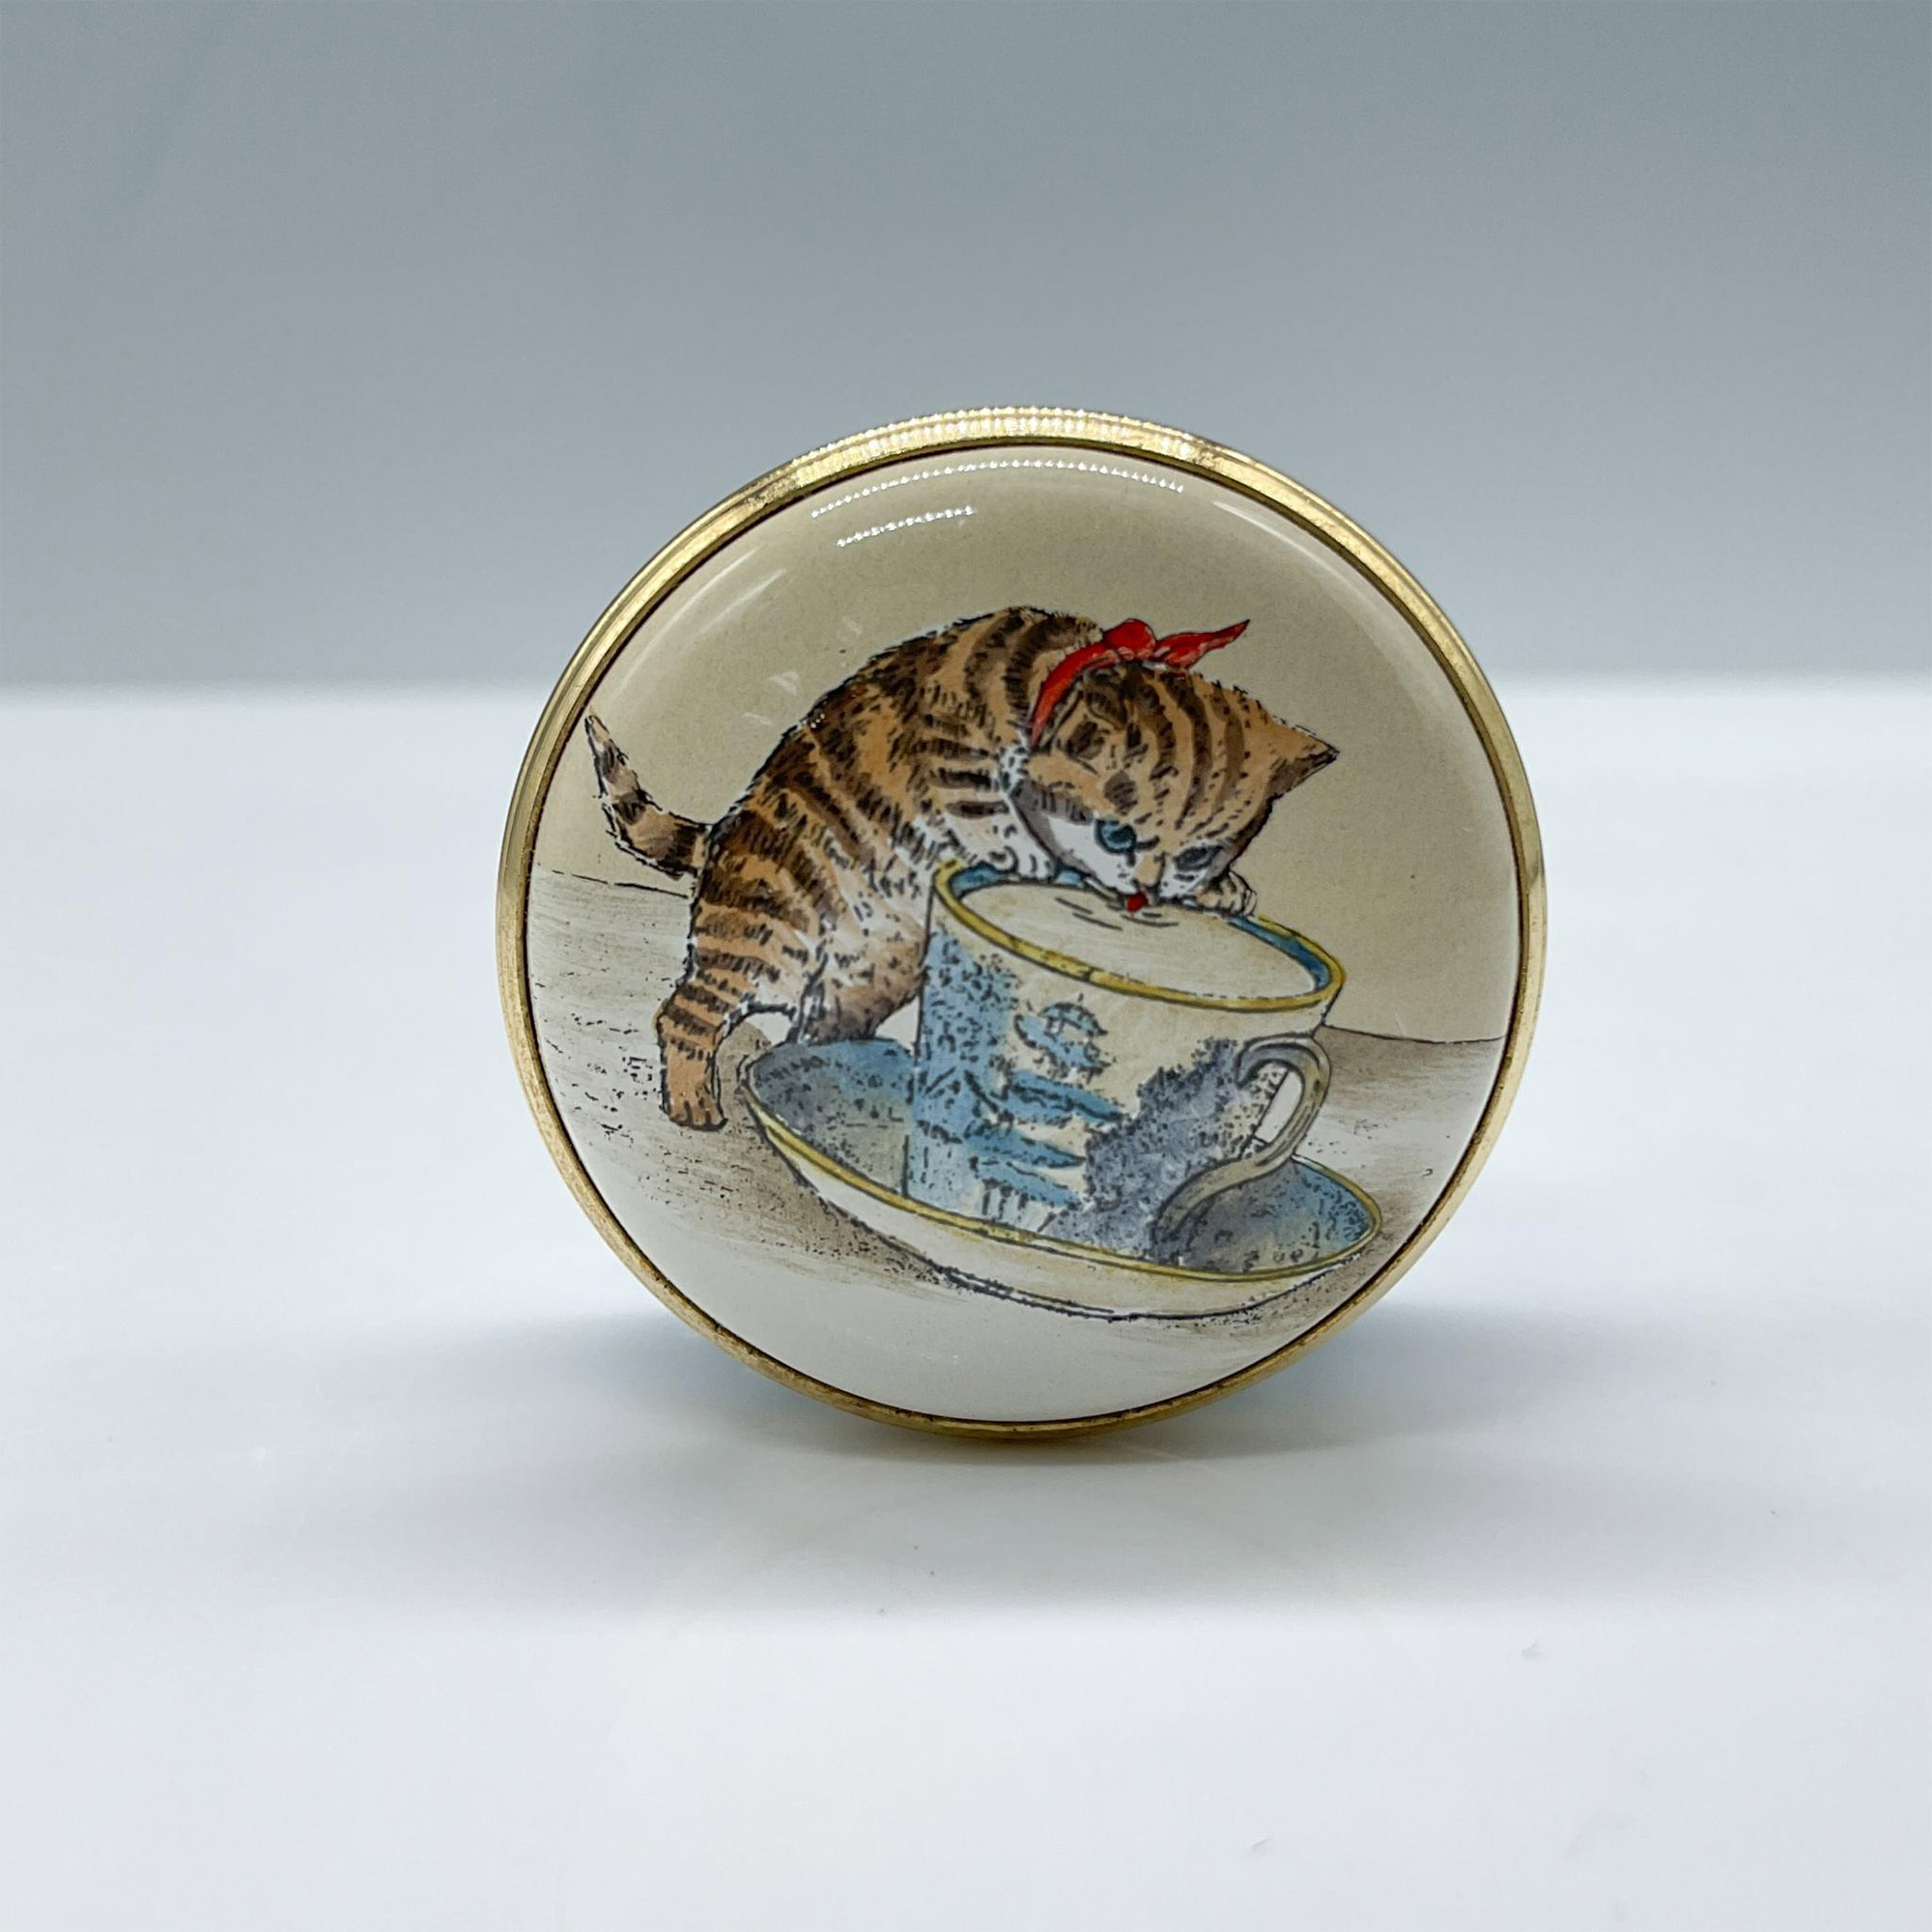 Halcyon Days Enamel Treasure Box, You're The Cats Whiskers - Image 2 of 4